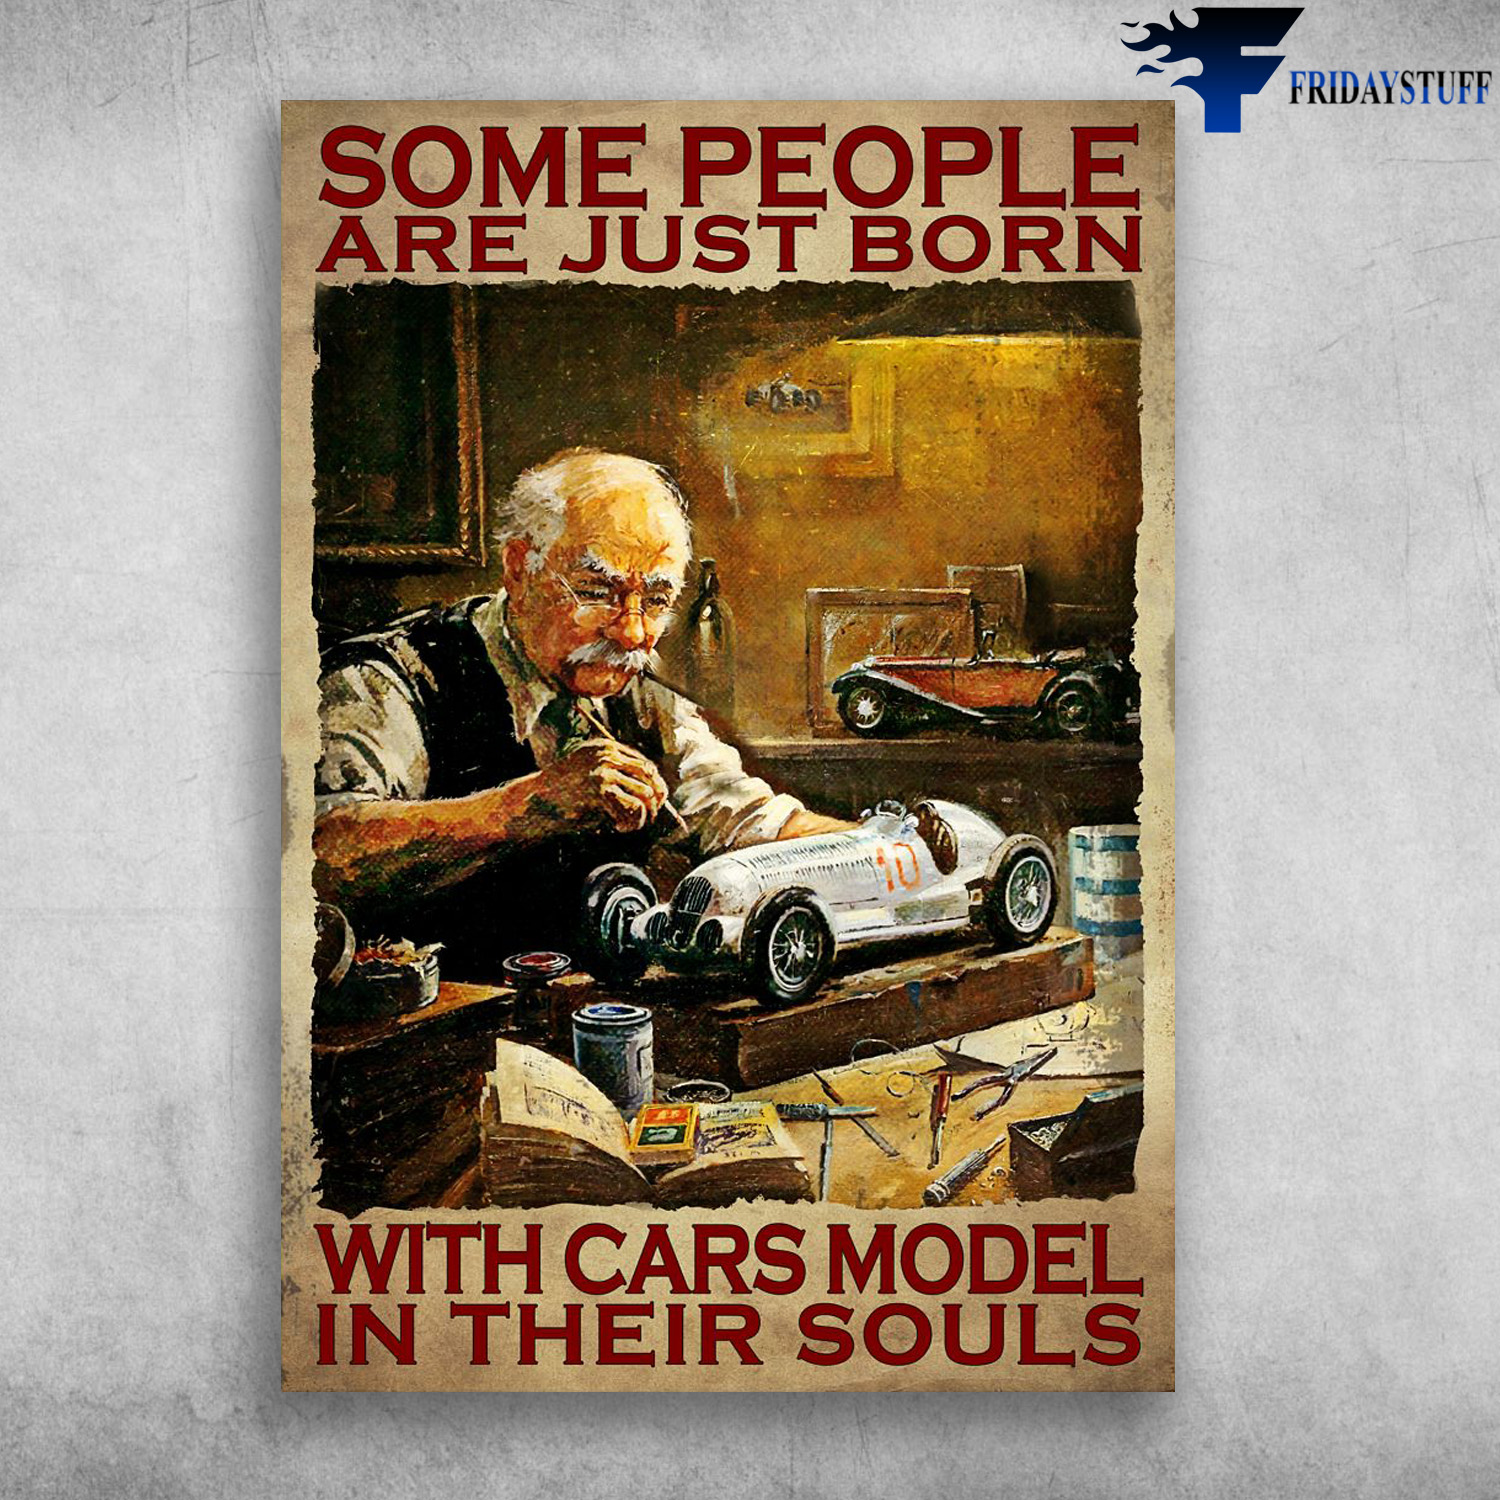 Old Man, Cars Model - Some People Are Just Born, With Cars Model, In Their Souls